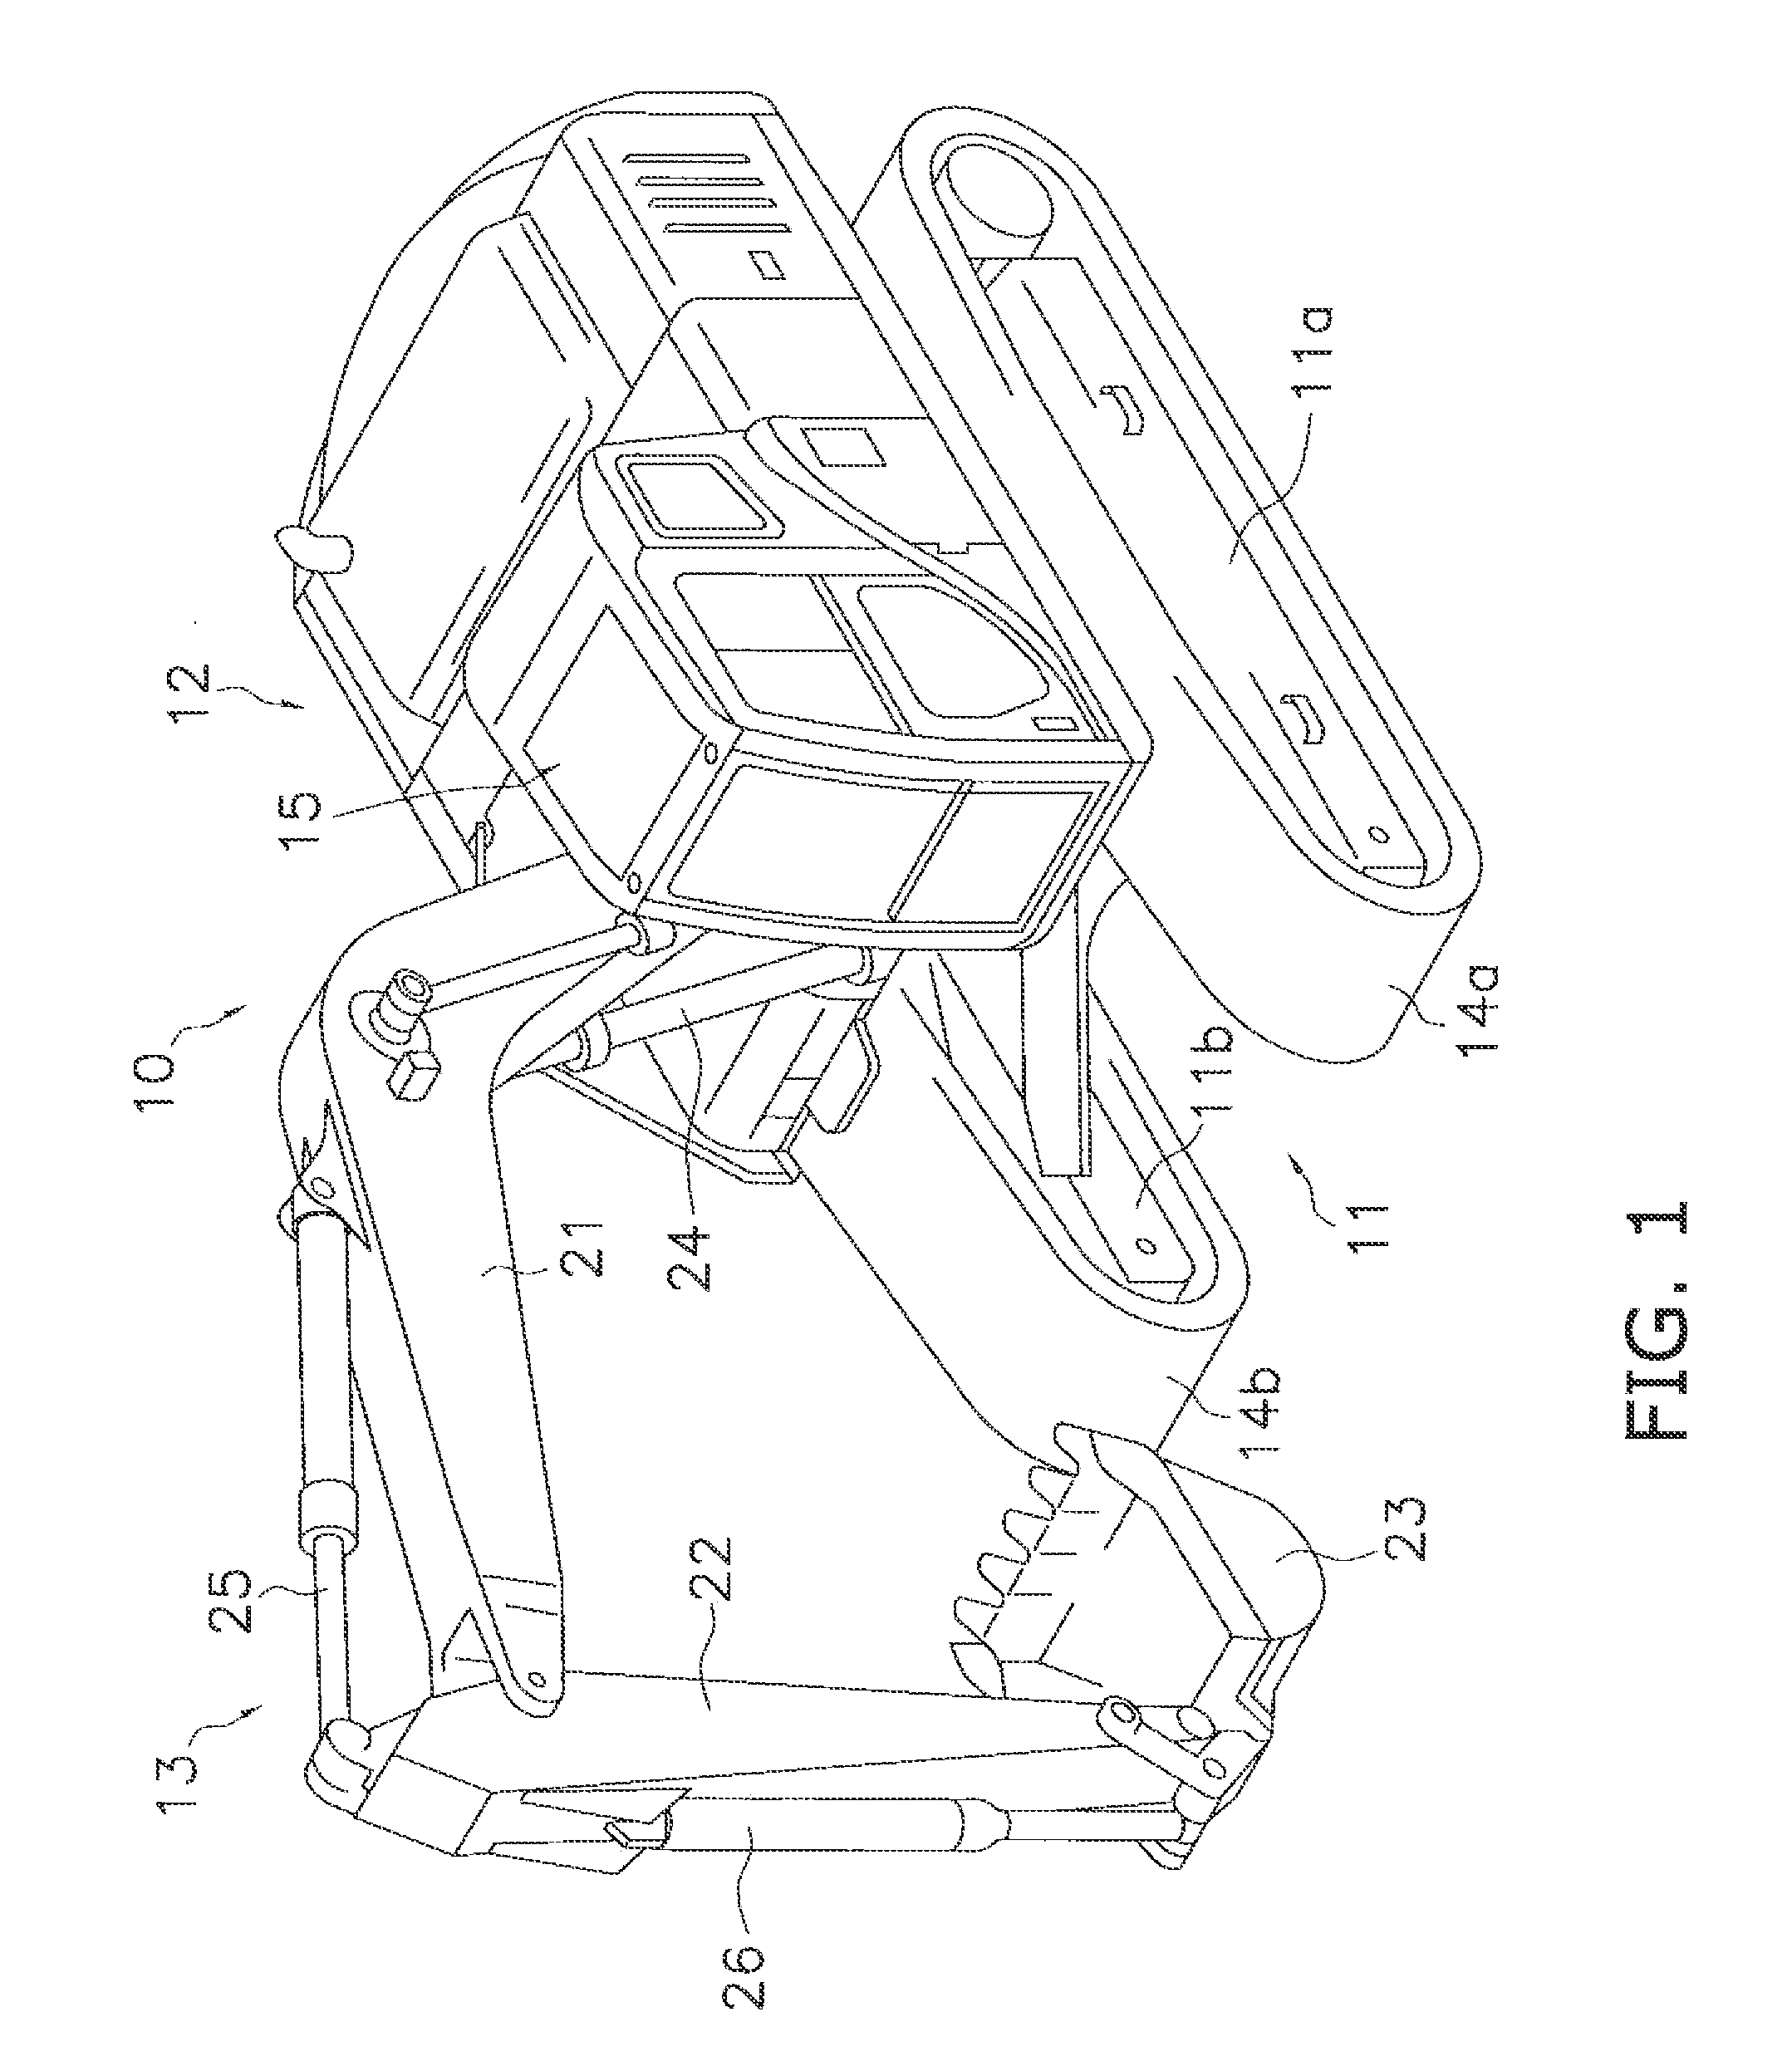 Work machine and control method for work machines